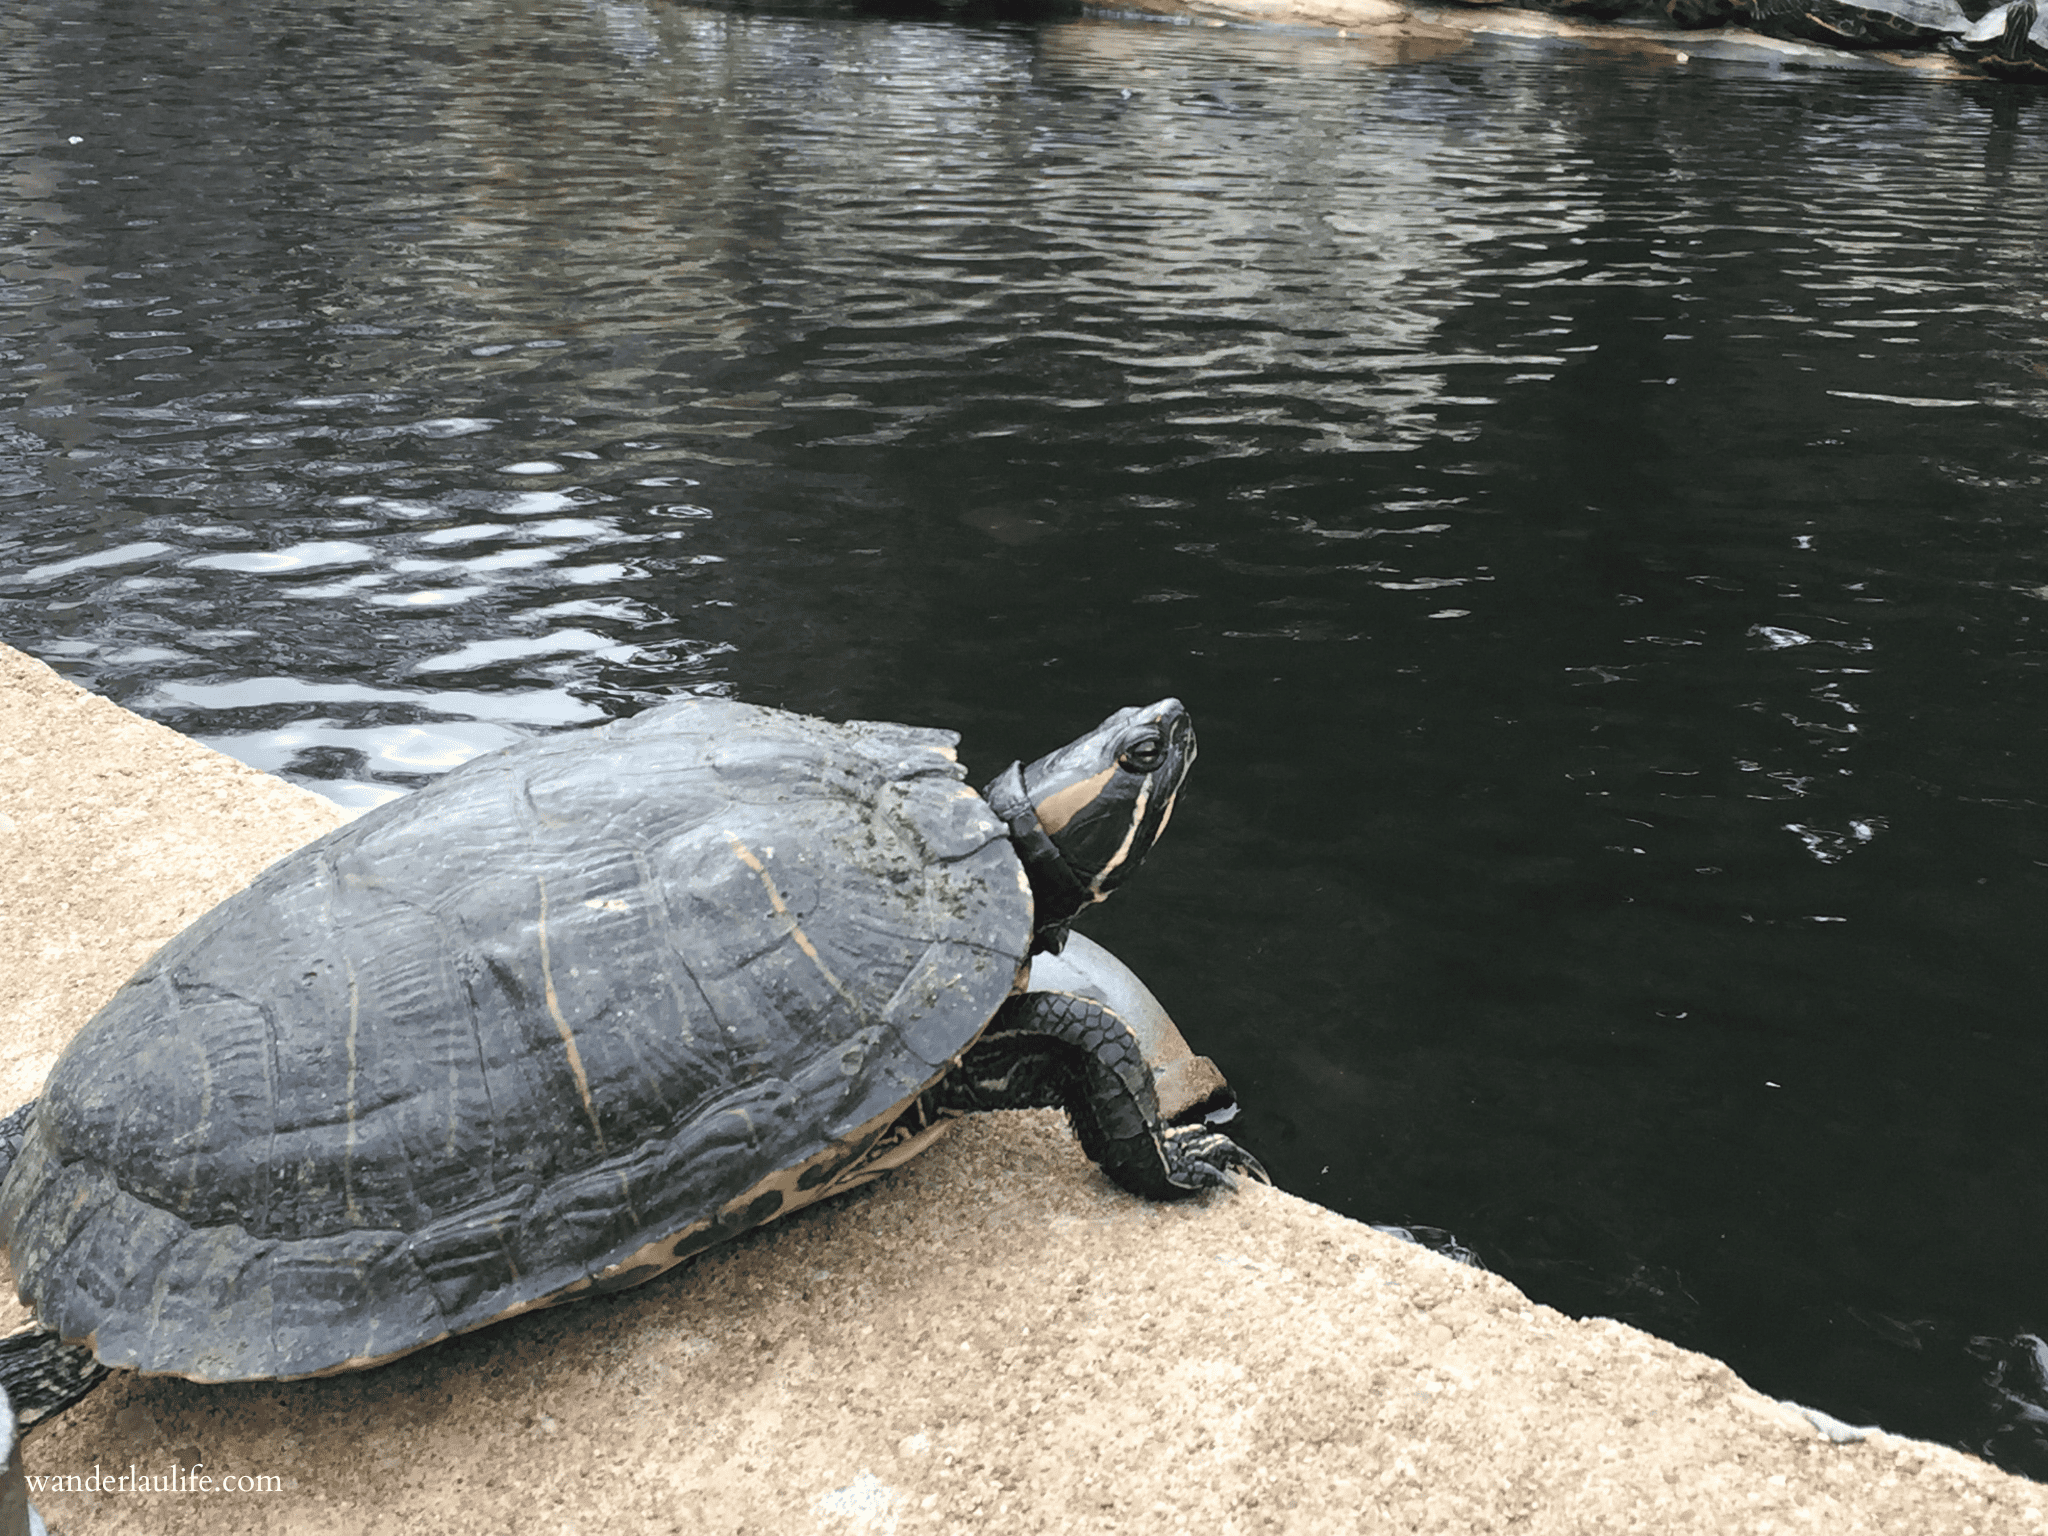 My weekend in Austin including befriend this big turtle on Turtle Pond at the University of Texas at Austin.